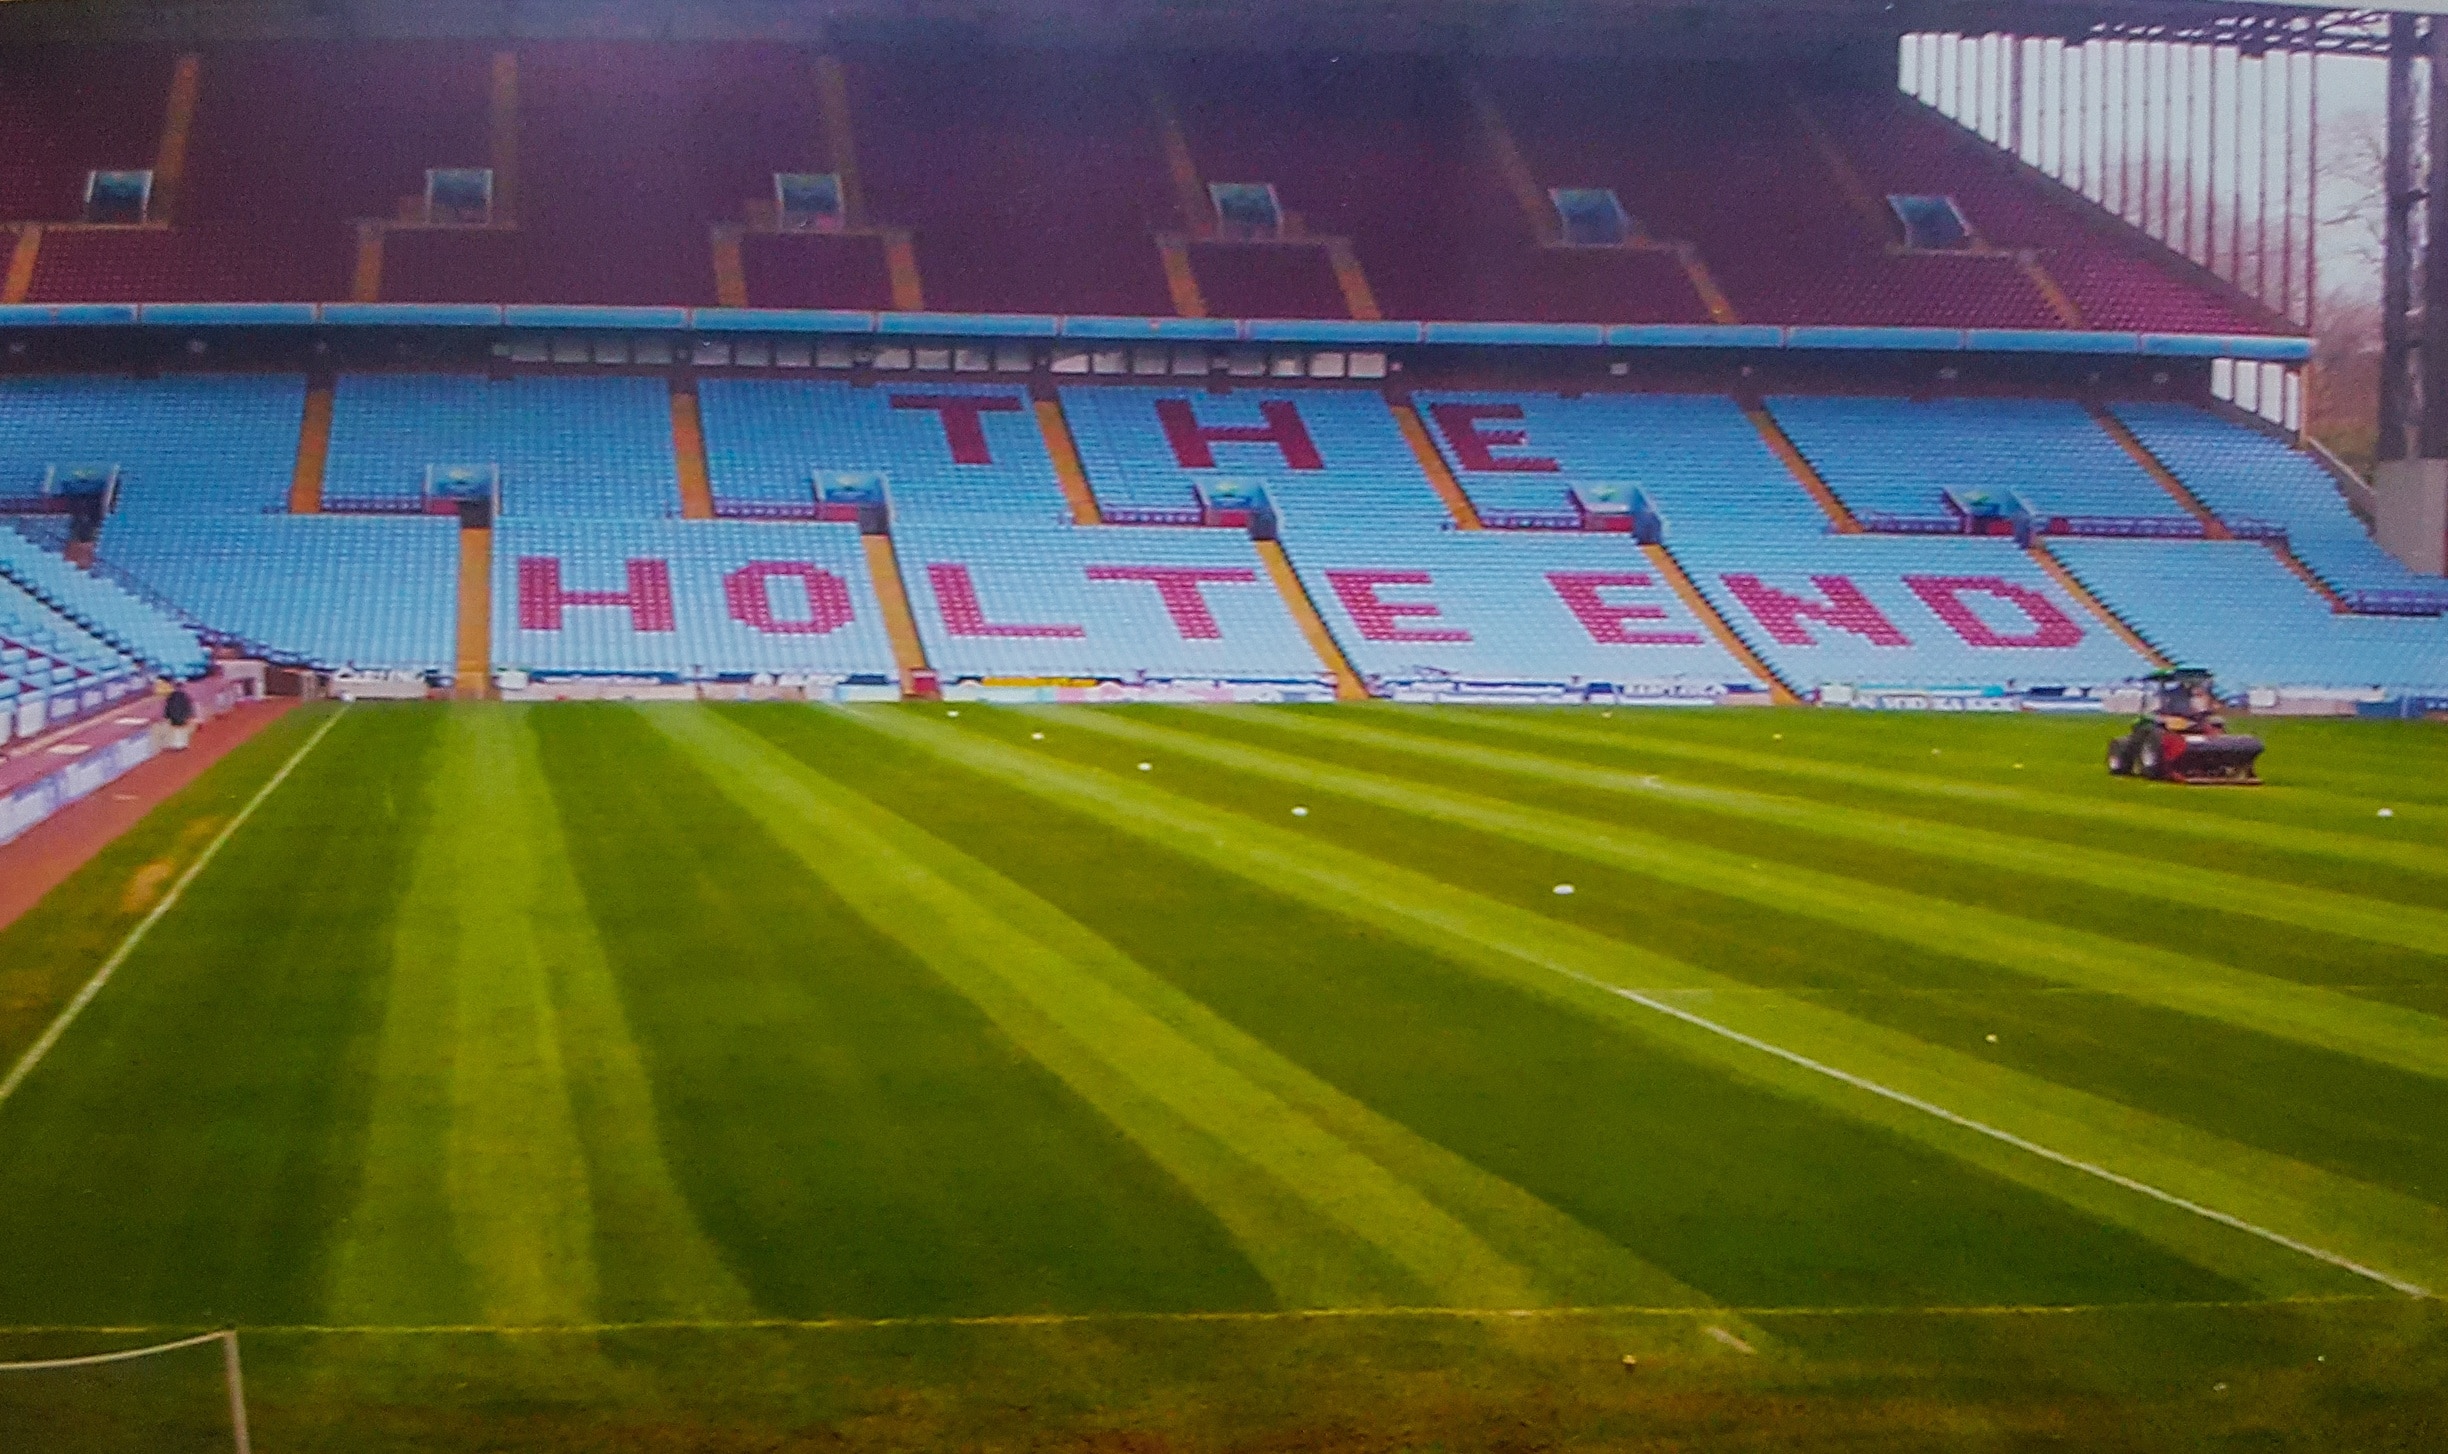 The famous Holte End at Villa Park - home of Aston Villa. They didn't actually offer stadium tours, but I sweet talked security and was allowed to explore the whole place unattended! 